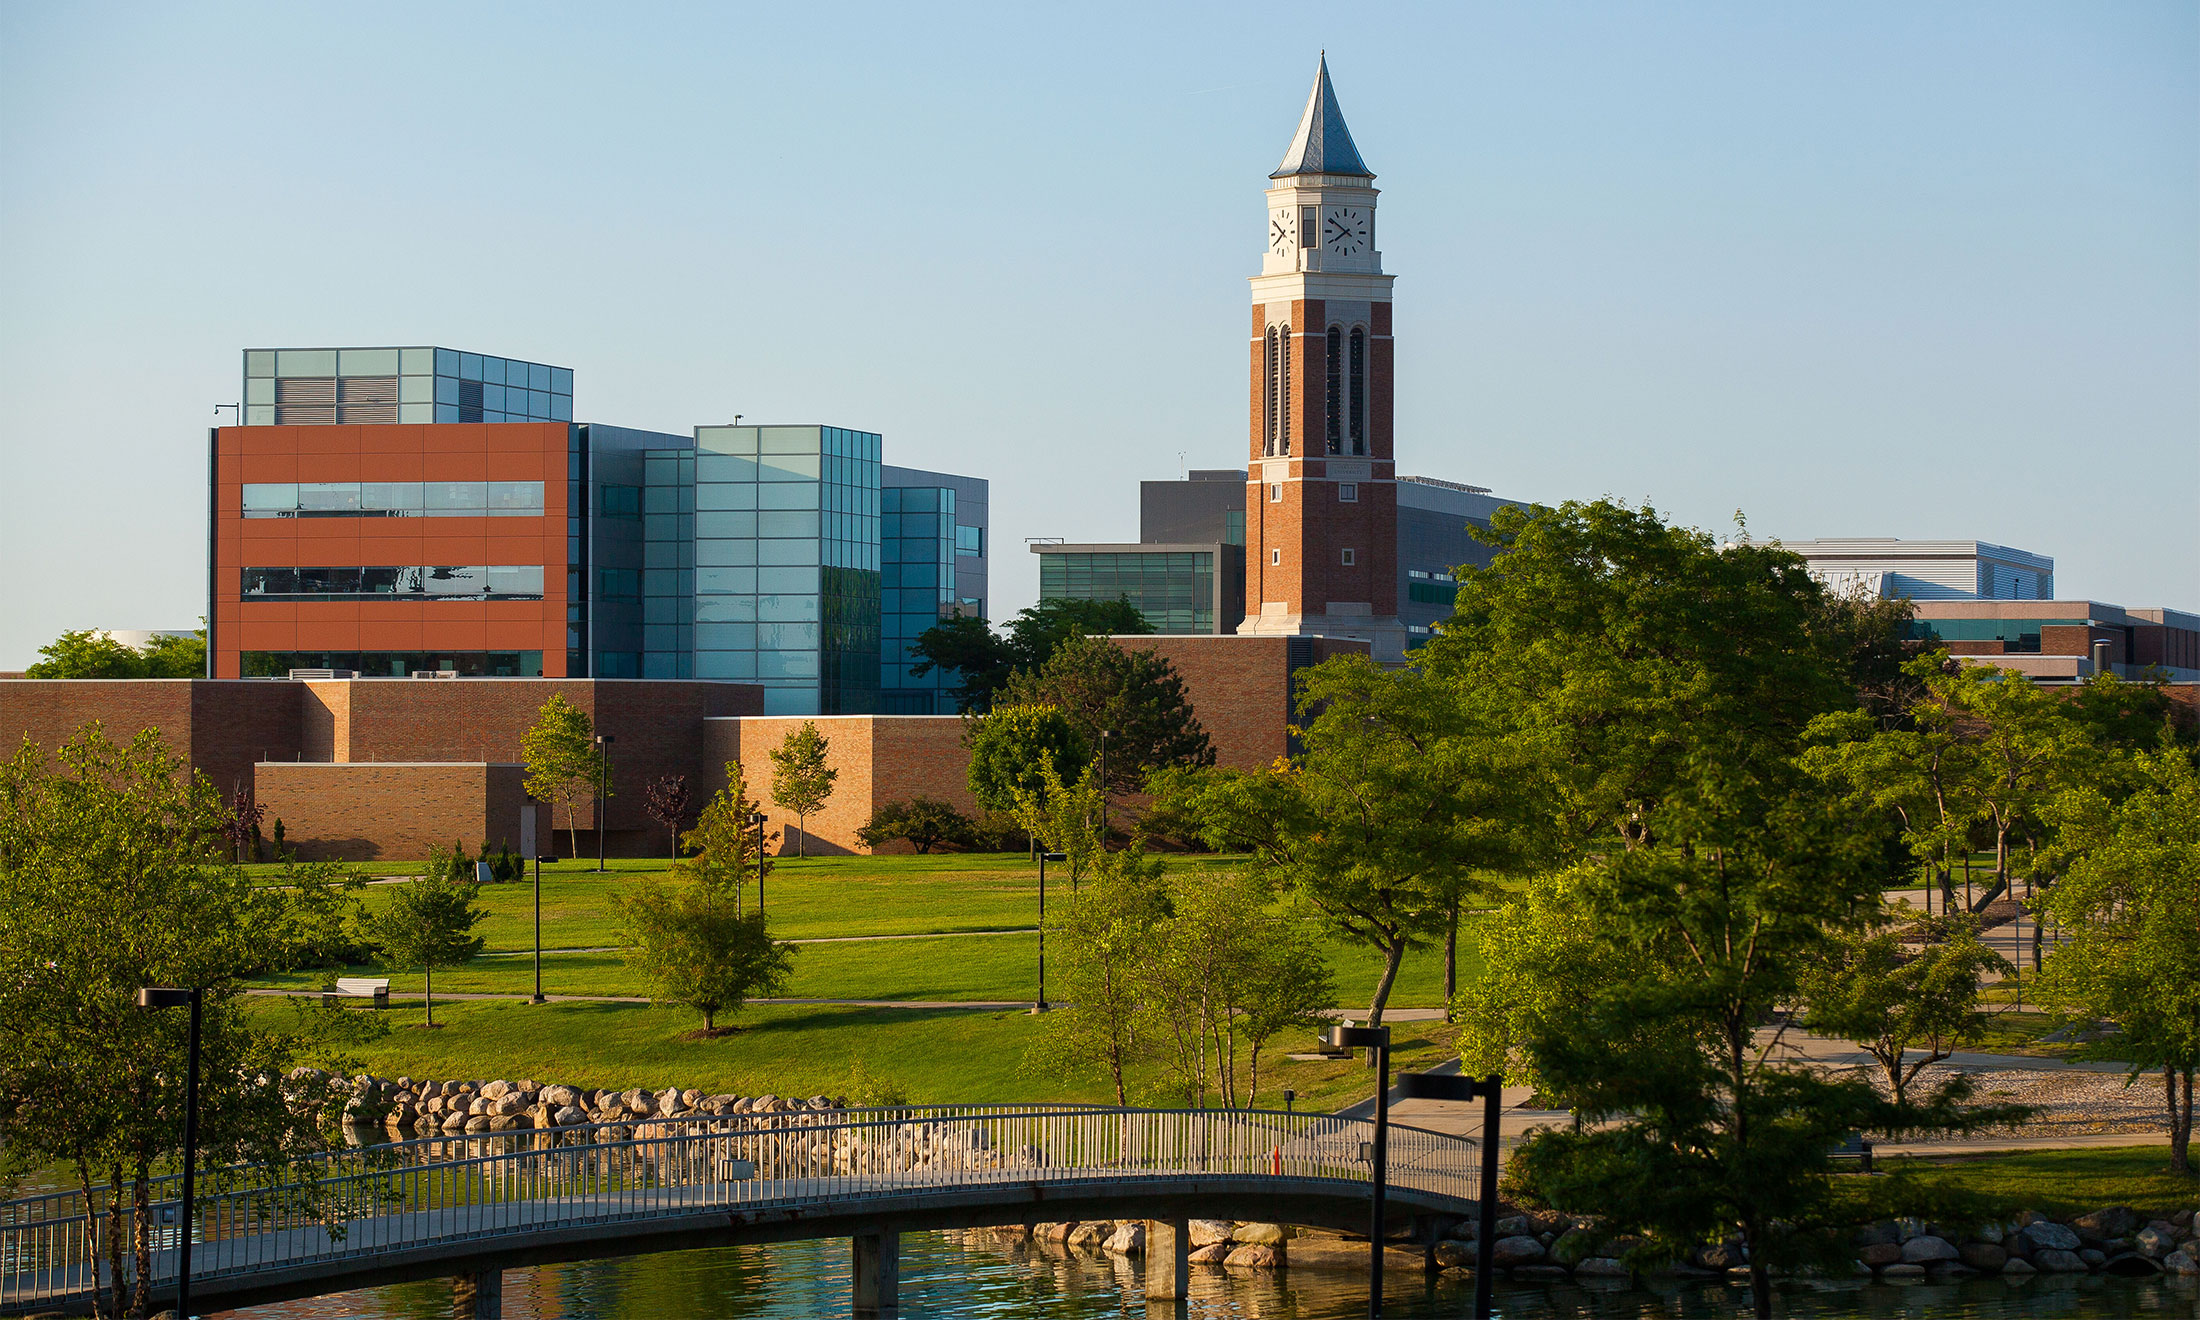 Oakland University offers testoptional admission for fall 2020 and